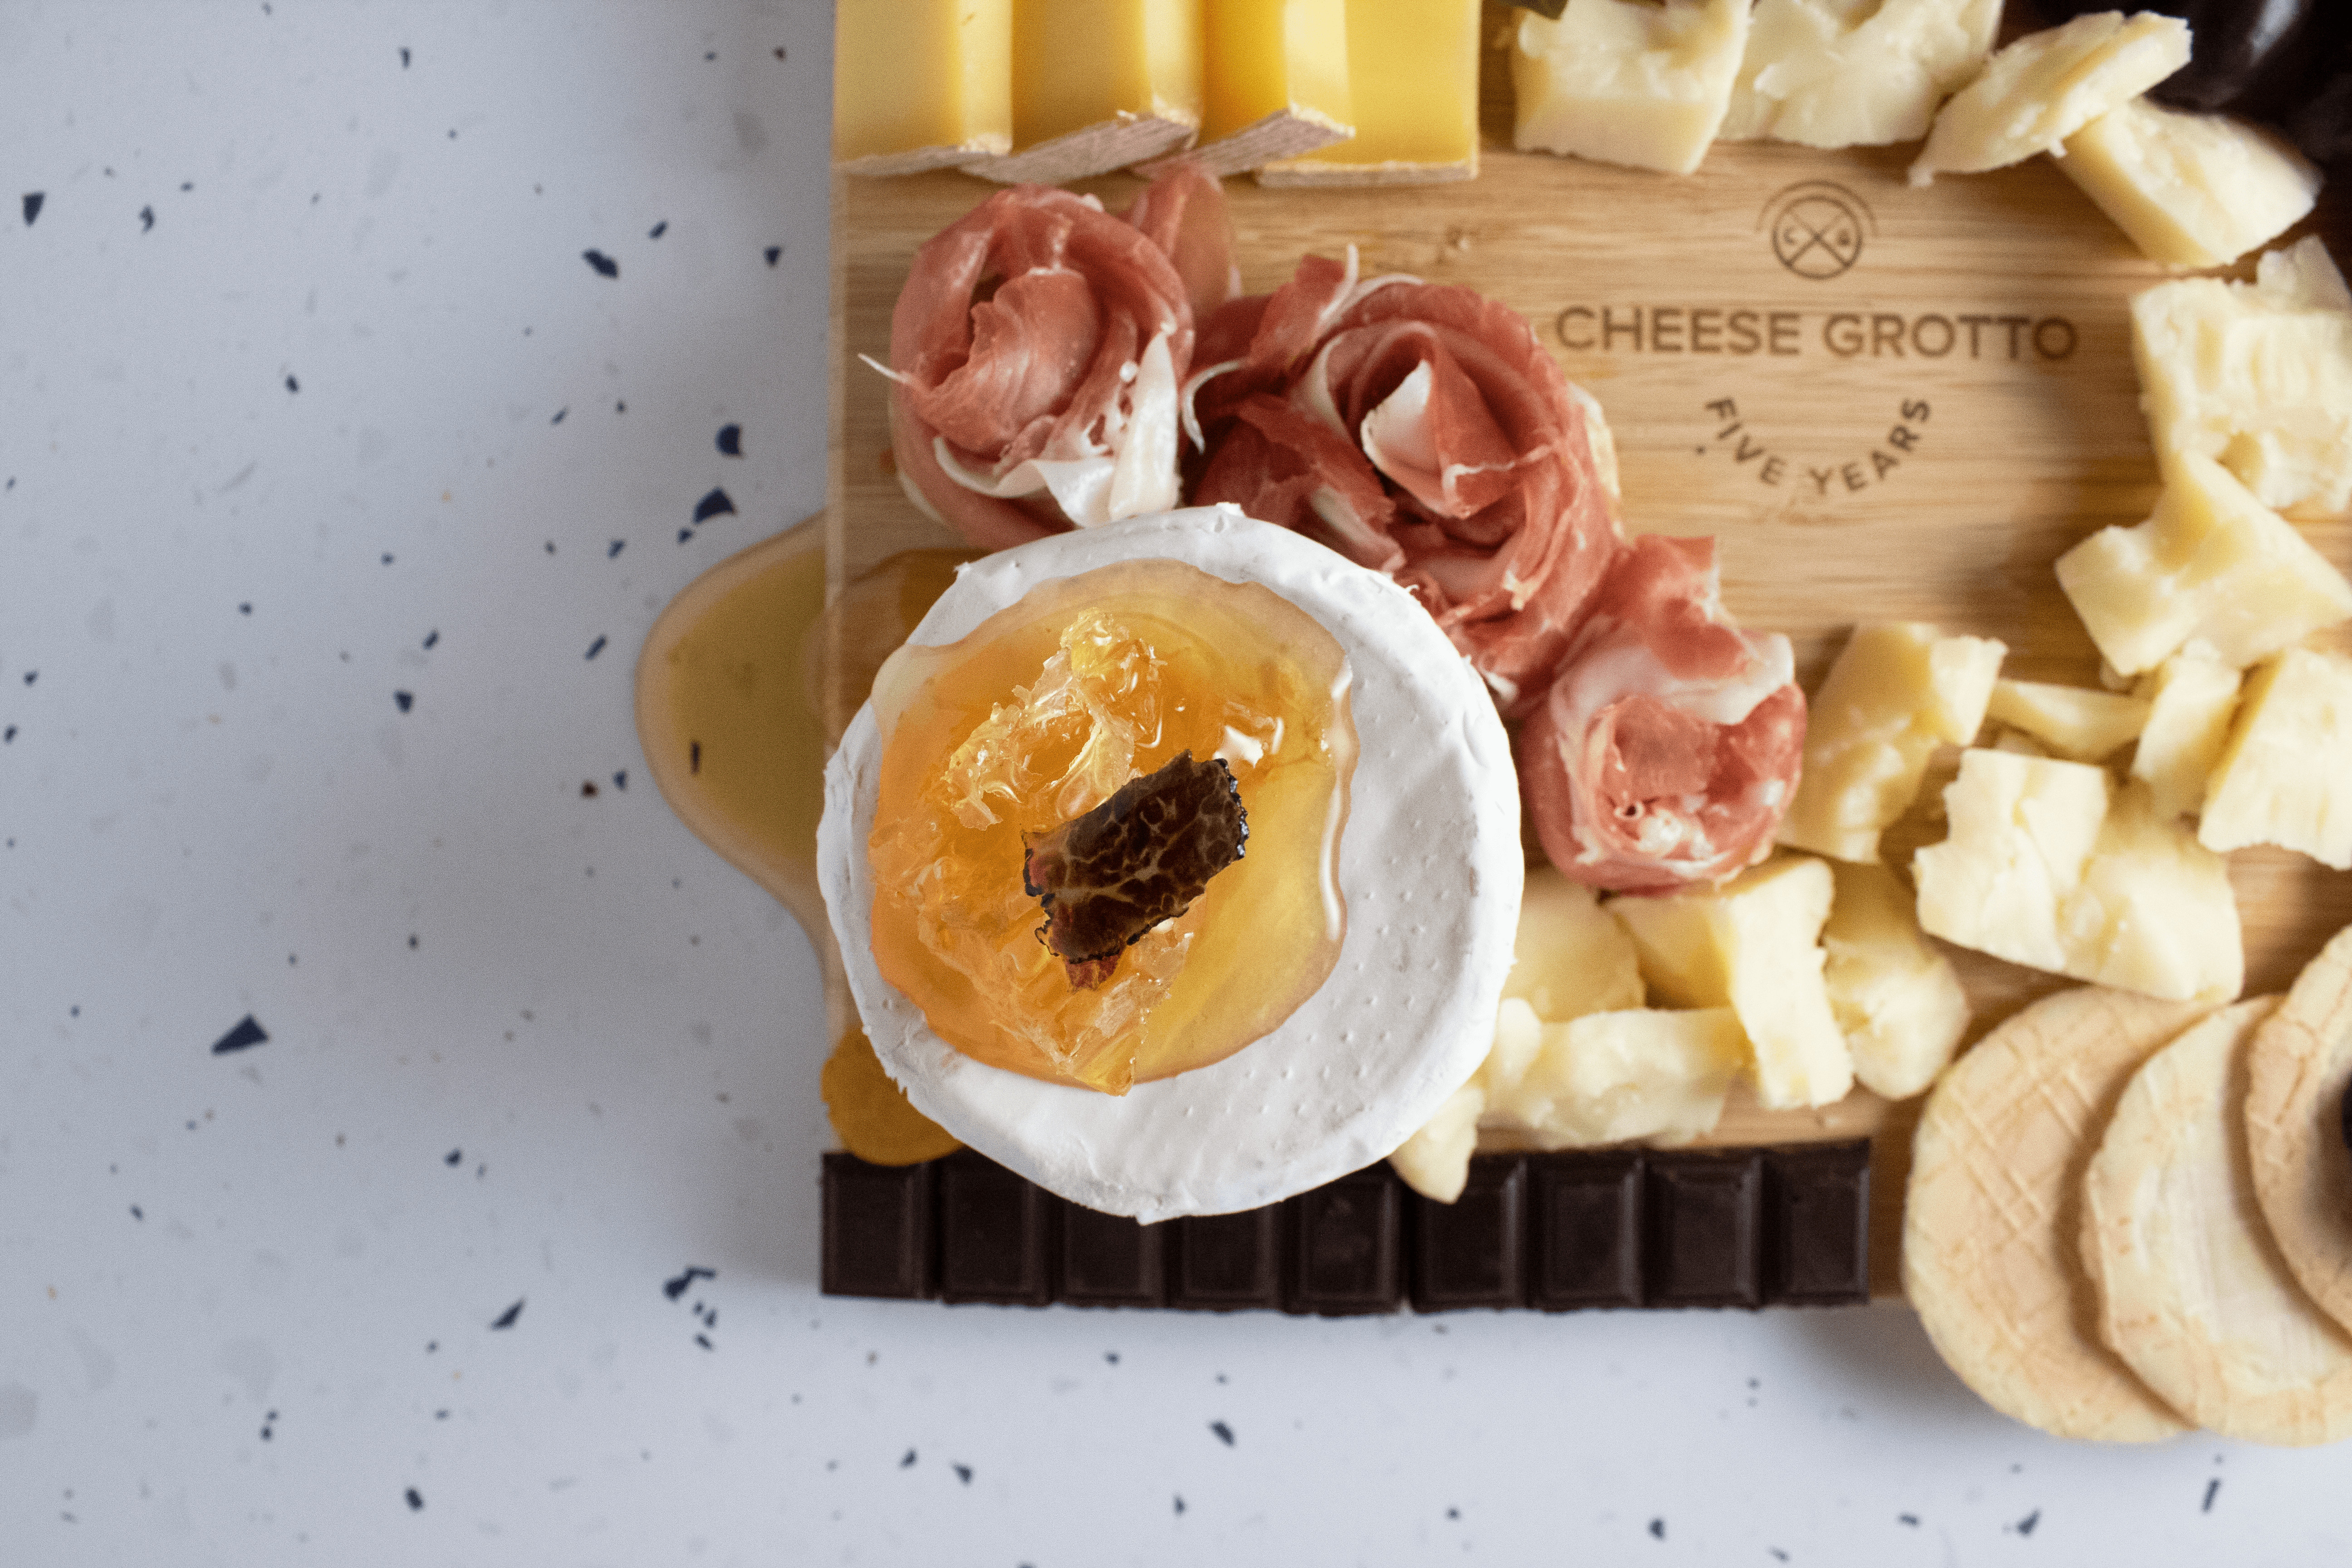 5 Things Everyone Should Know About Camembert